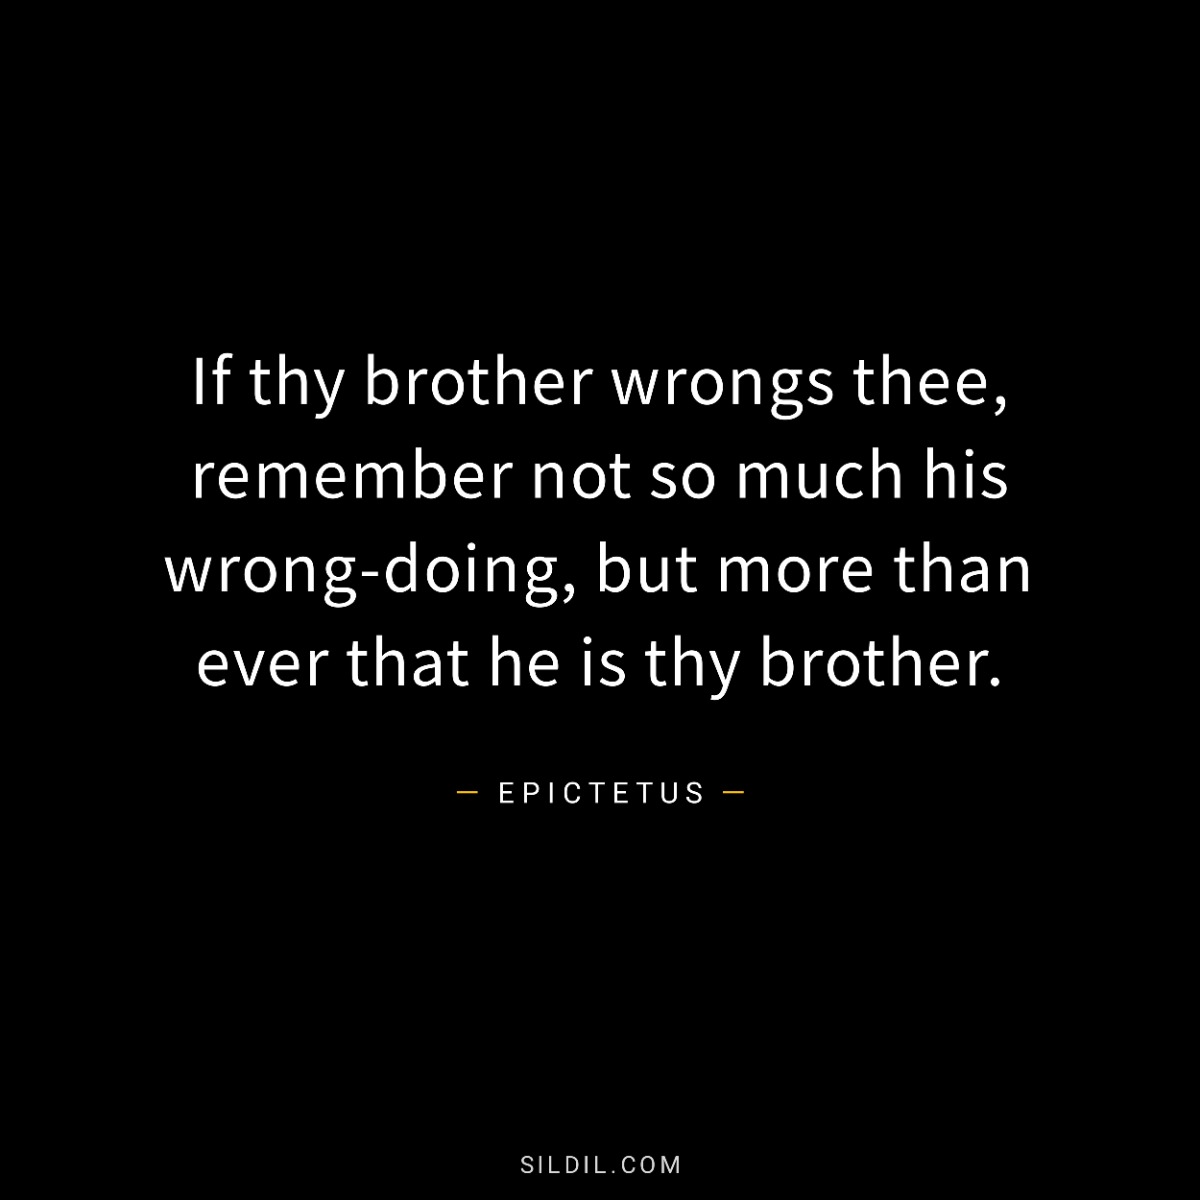 If thy brother wrongs thee, remember not so much his wrong-doing, but more than ever that he is thy brother.